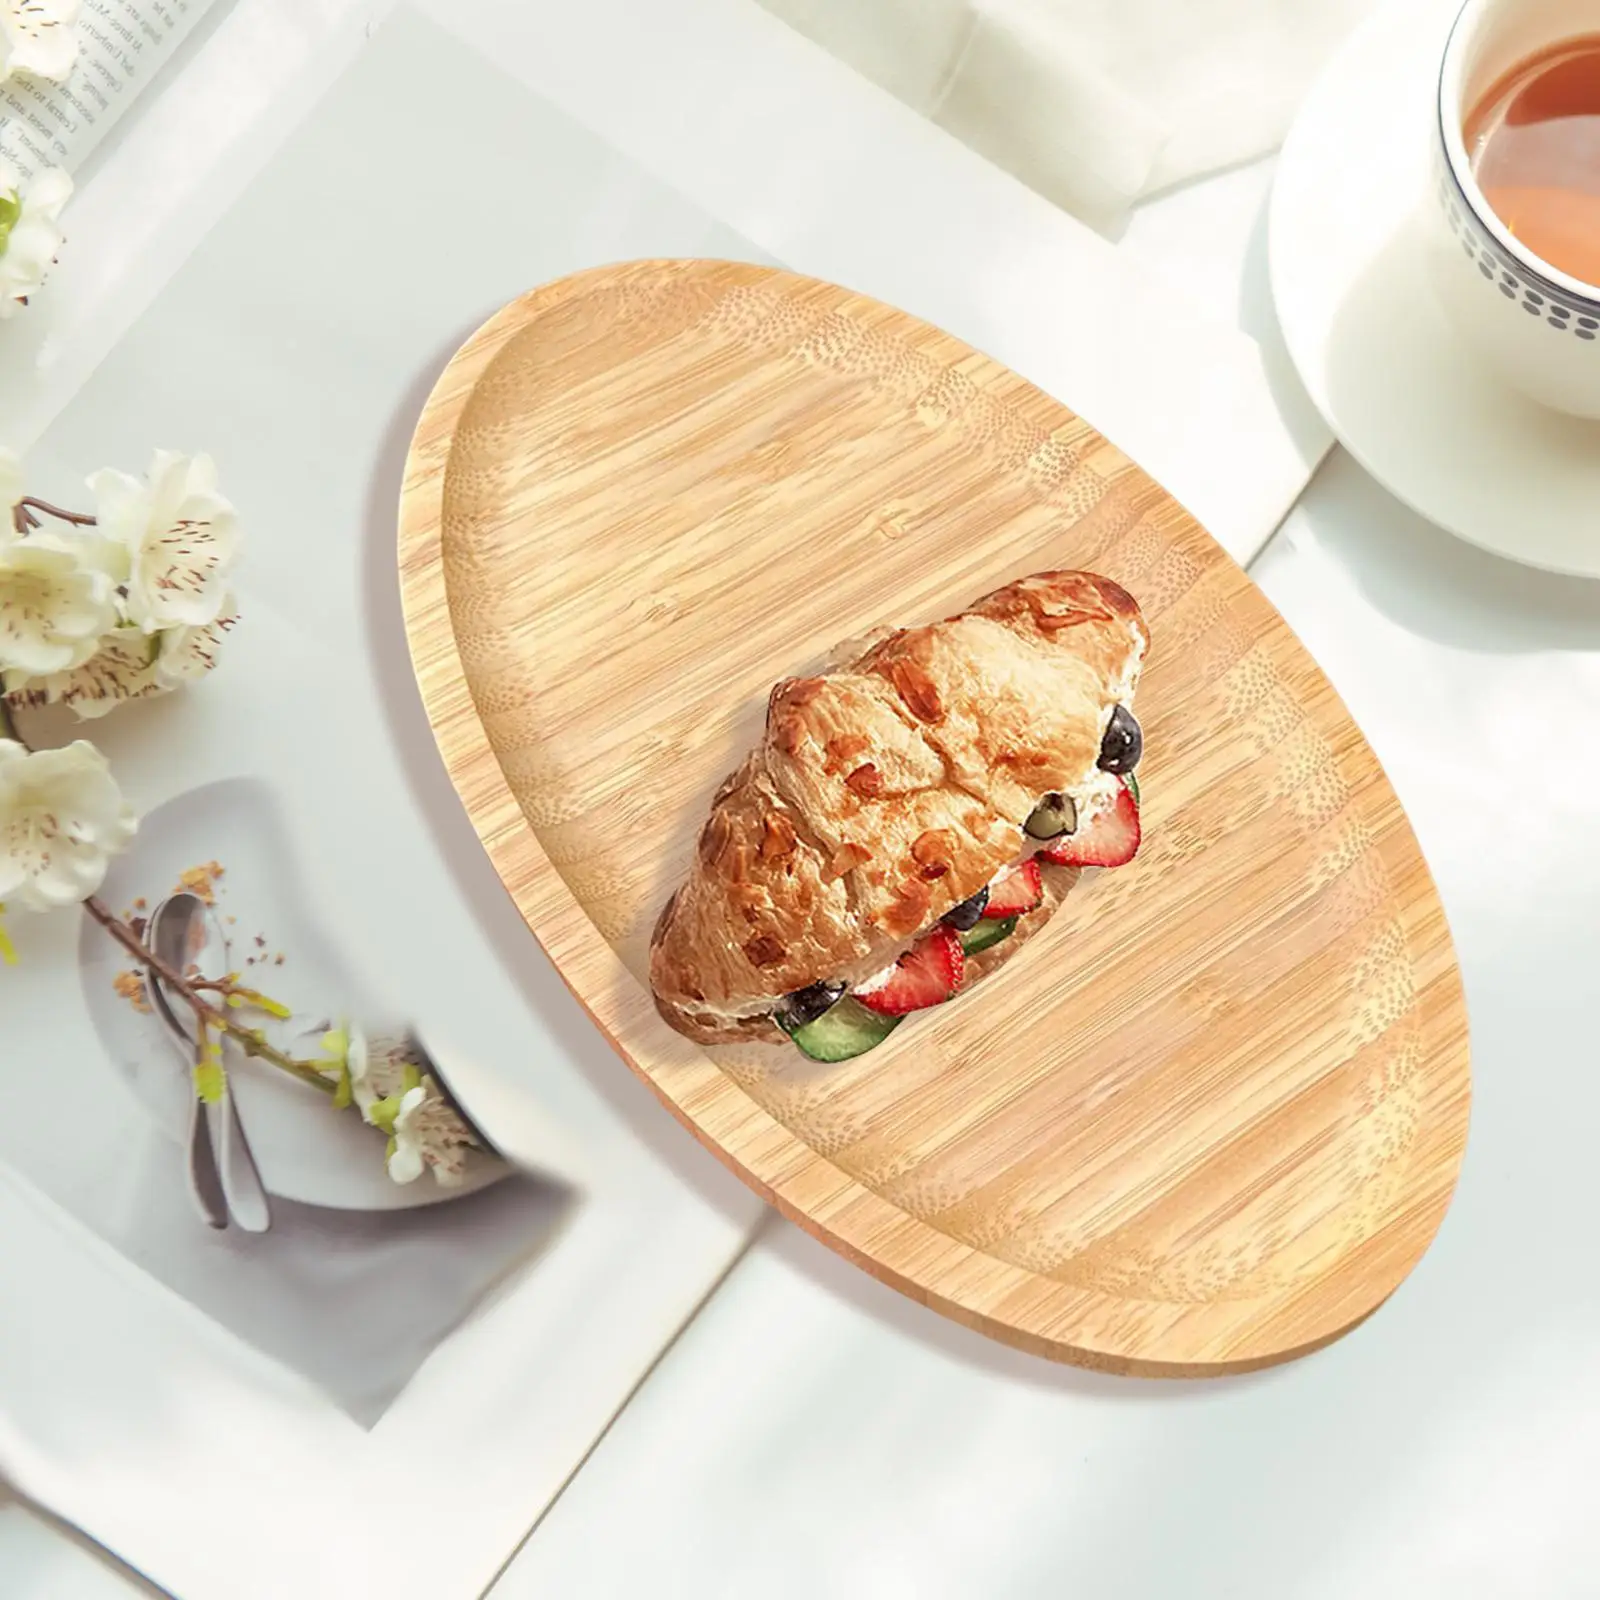 Wood Tray Photo Props Housewarming Gift Wooden Trays Platter for Bread Meat Vegetables Home Kitchen Decor Cheese Ham